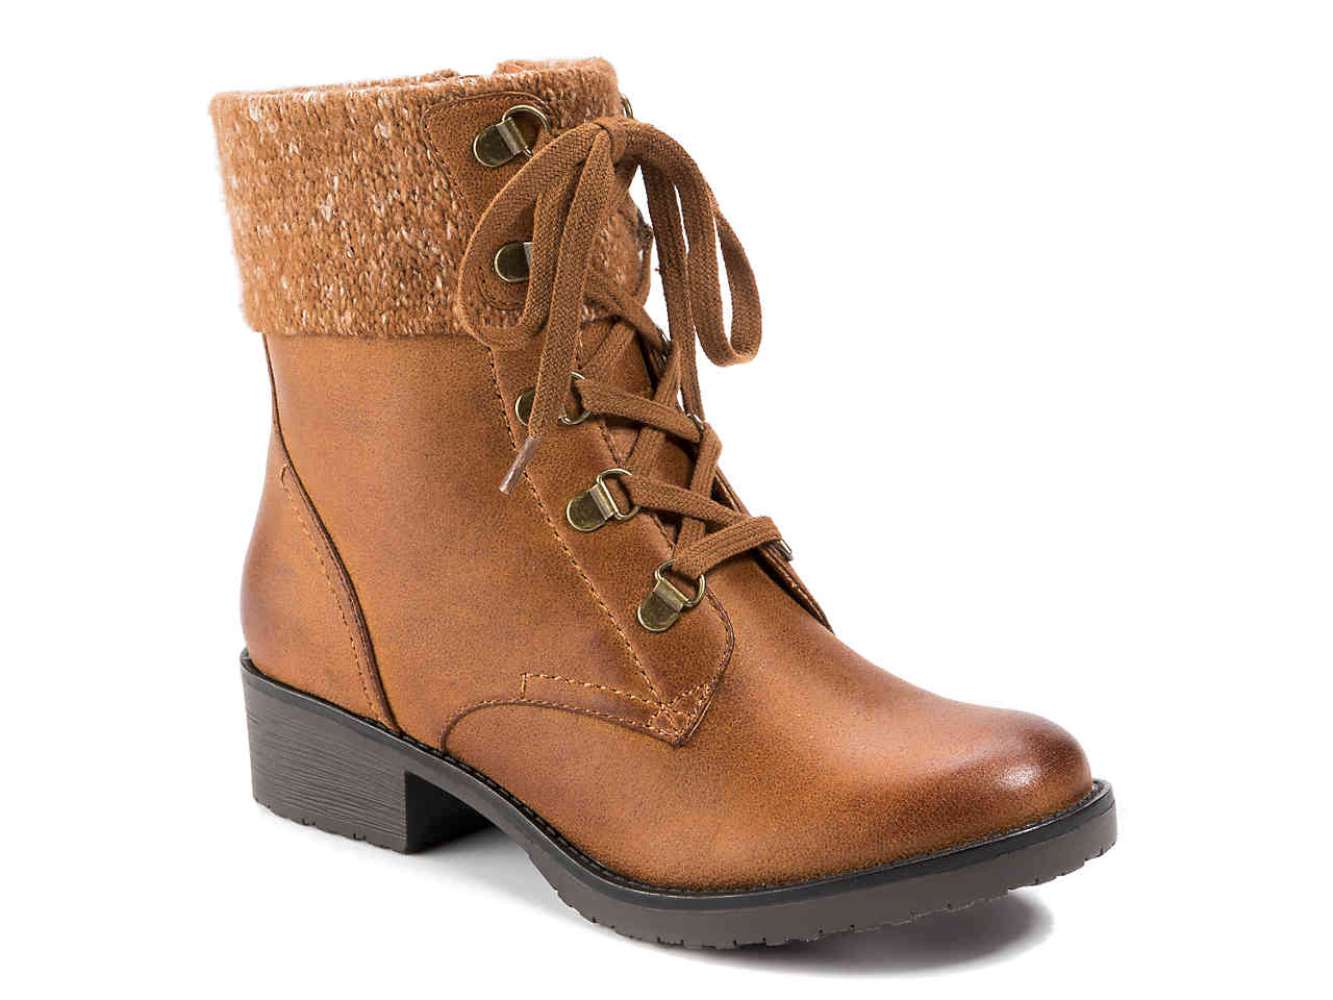 Bare Traps Womens Orley Closed Toe Mid-Calf Fashion Boots, Cognac, Size ...